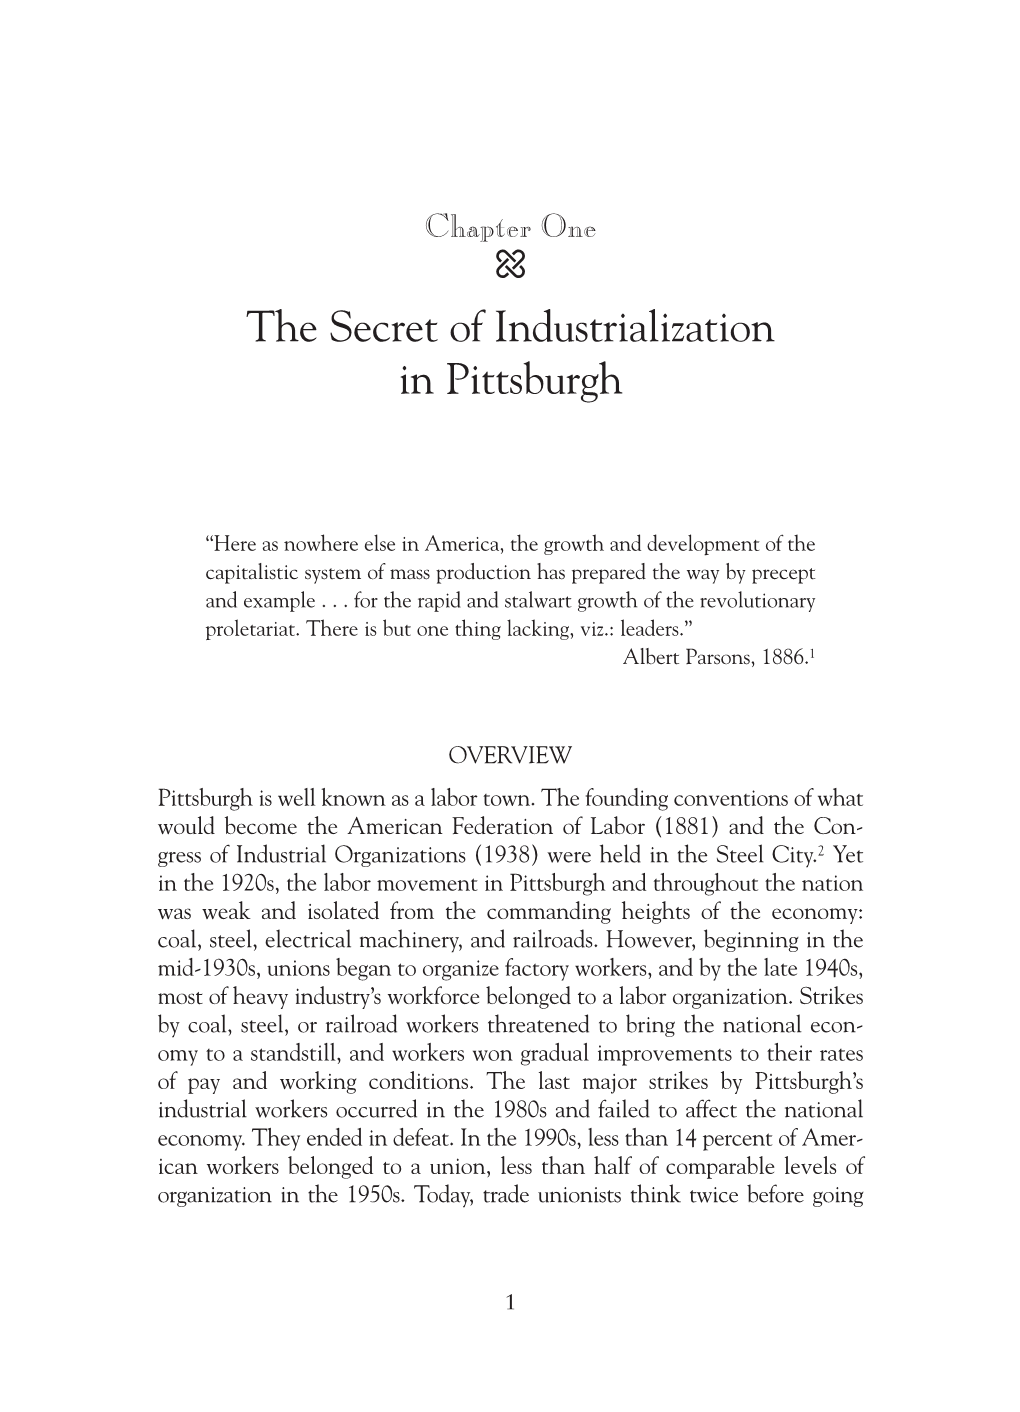 The Secret of Industrialization in Pittsburgh